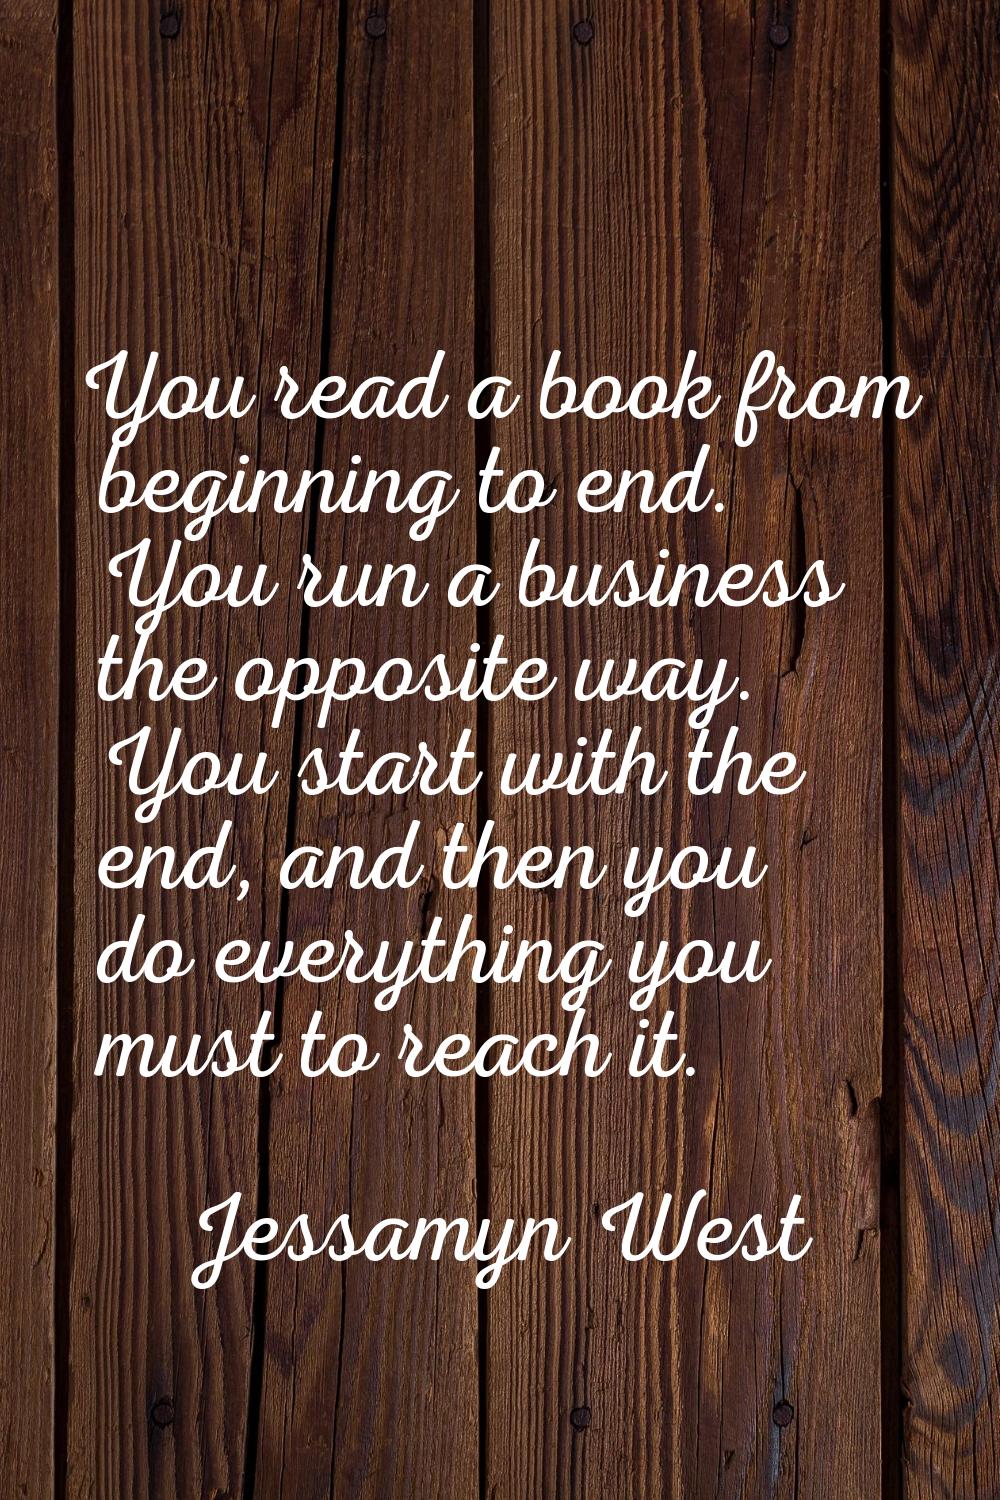 You read a book from beginning to end. You run a business the opposite way. You start with the end,